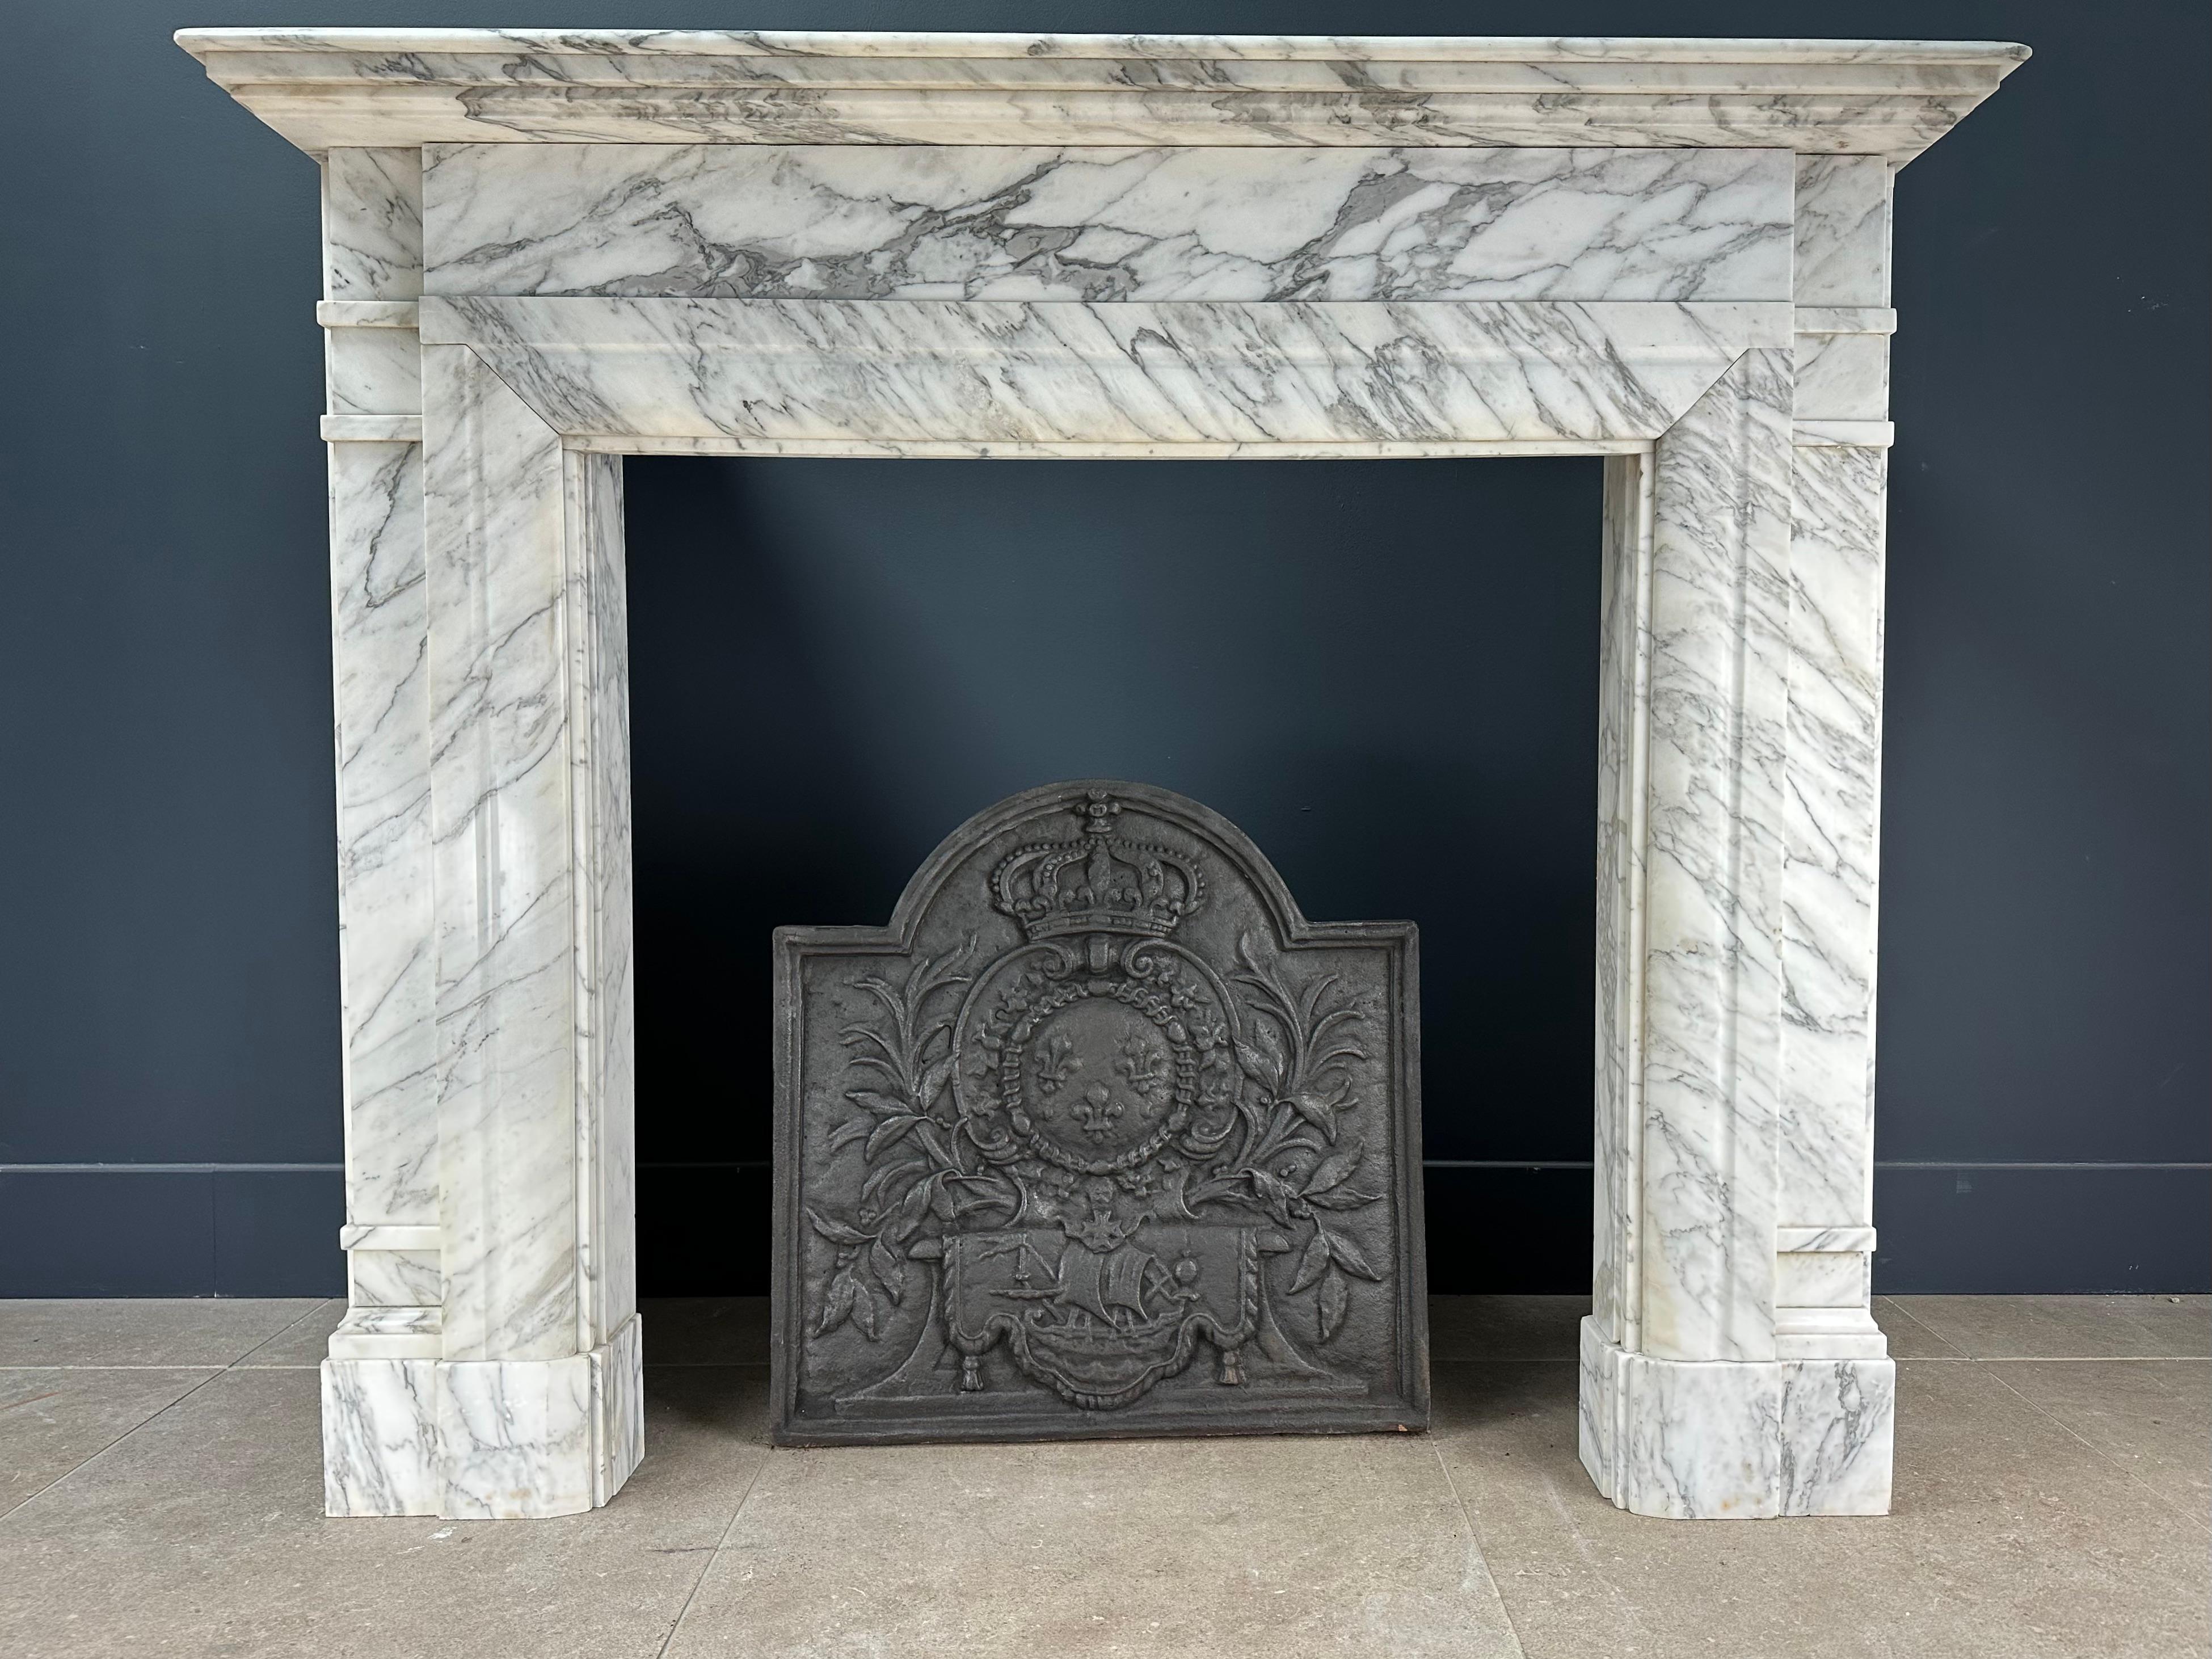 Beautiful l antique cast iron fireback. This fireback has a luxurious look. The fireback can be placed in a working fireplace against the fire wall or placed as a style item in an antique fireplace.

Weight: 50 KG.